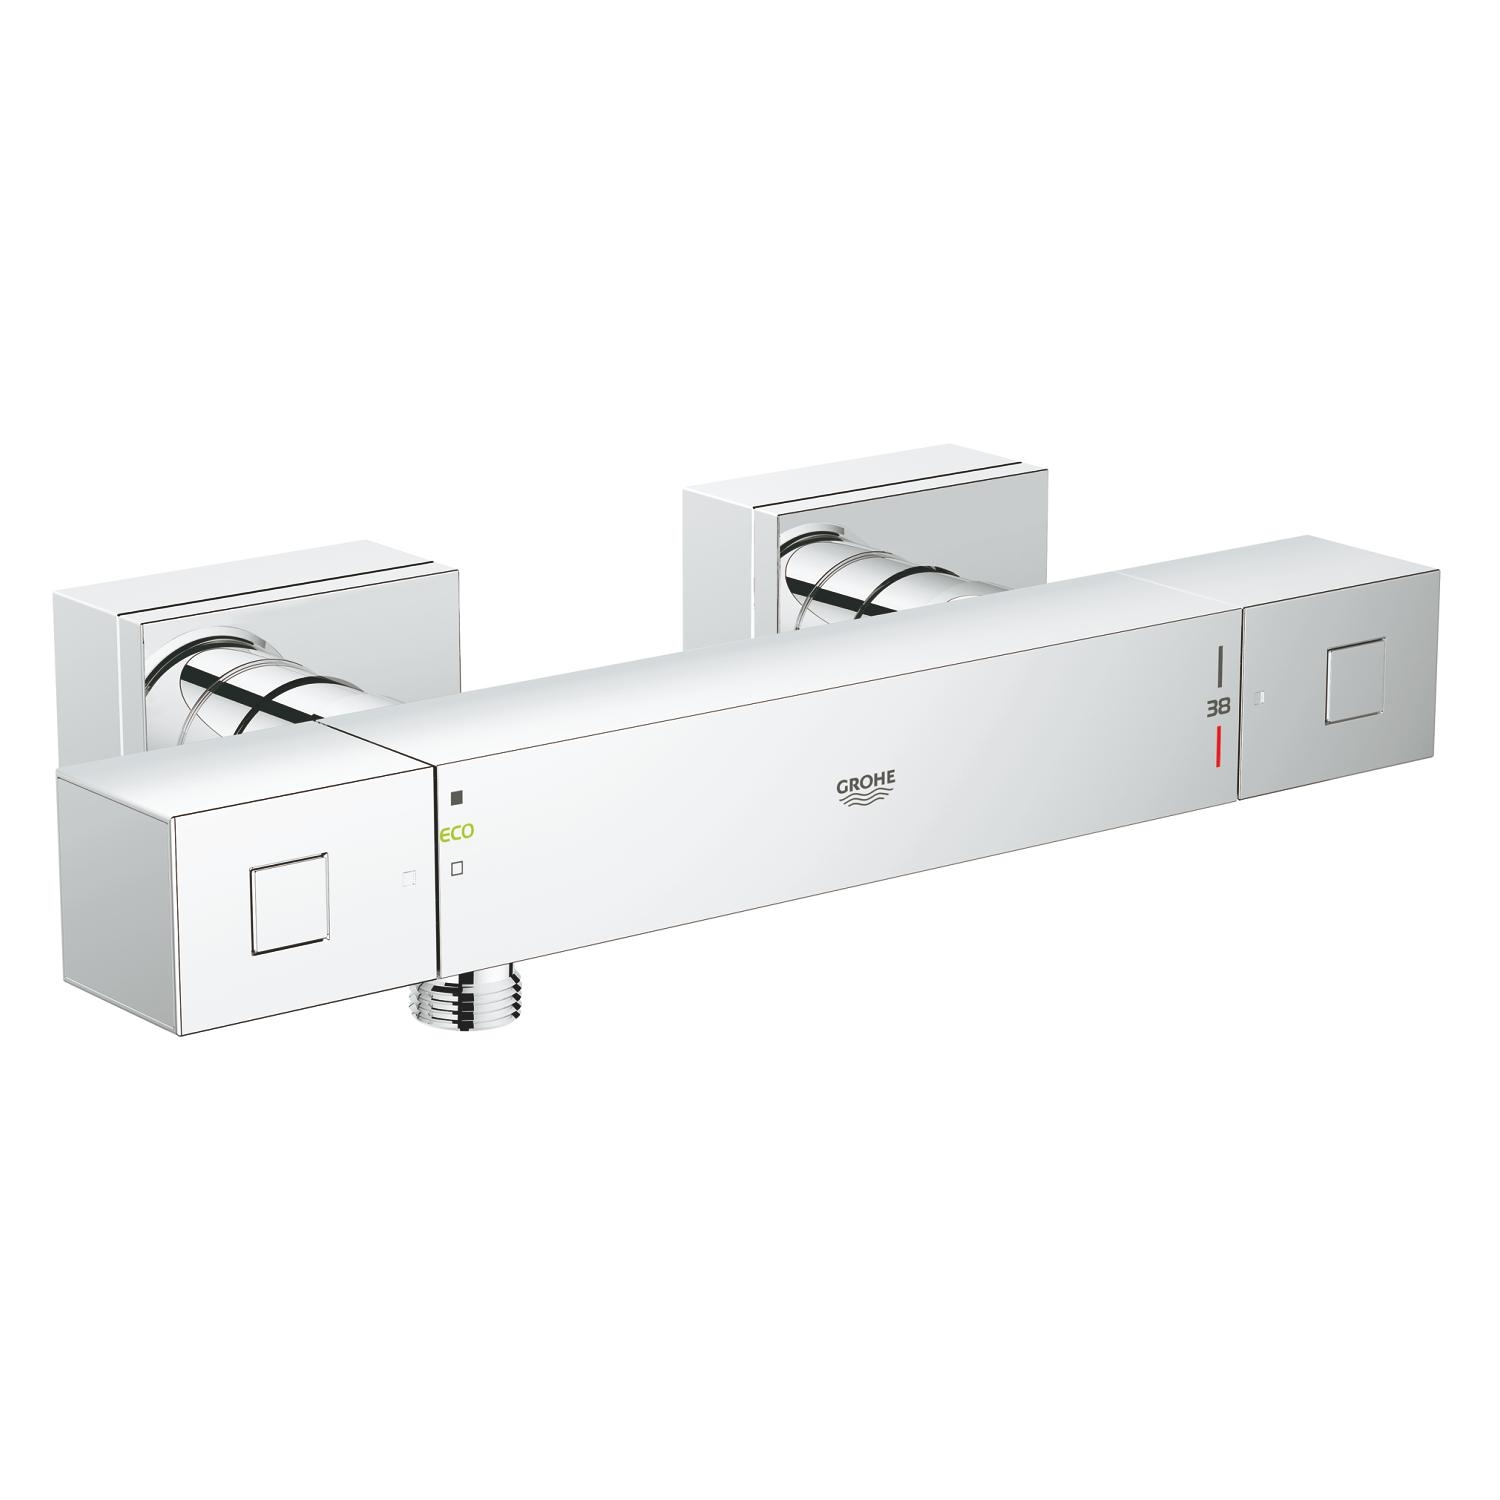 GROHE Grohtherm Cube bei xTWO